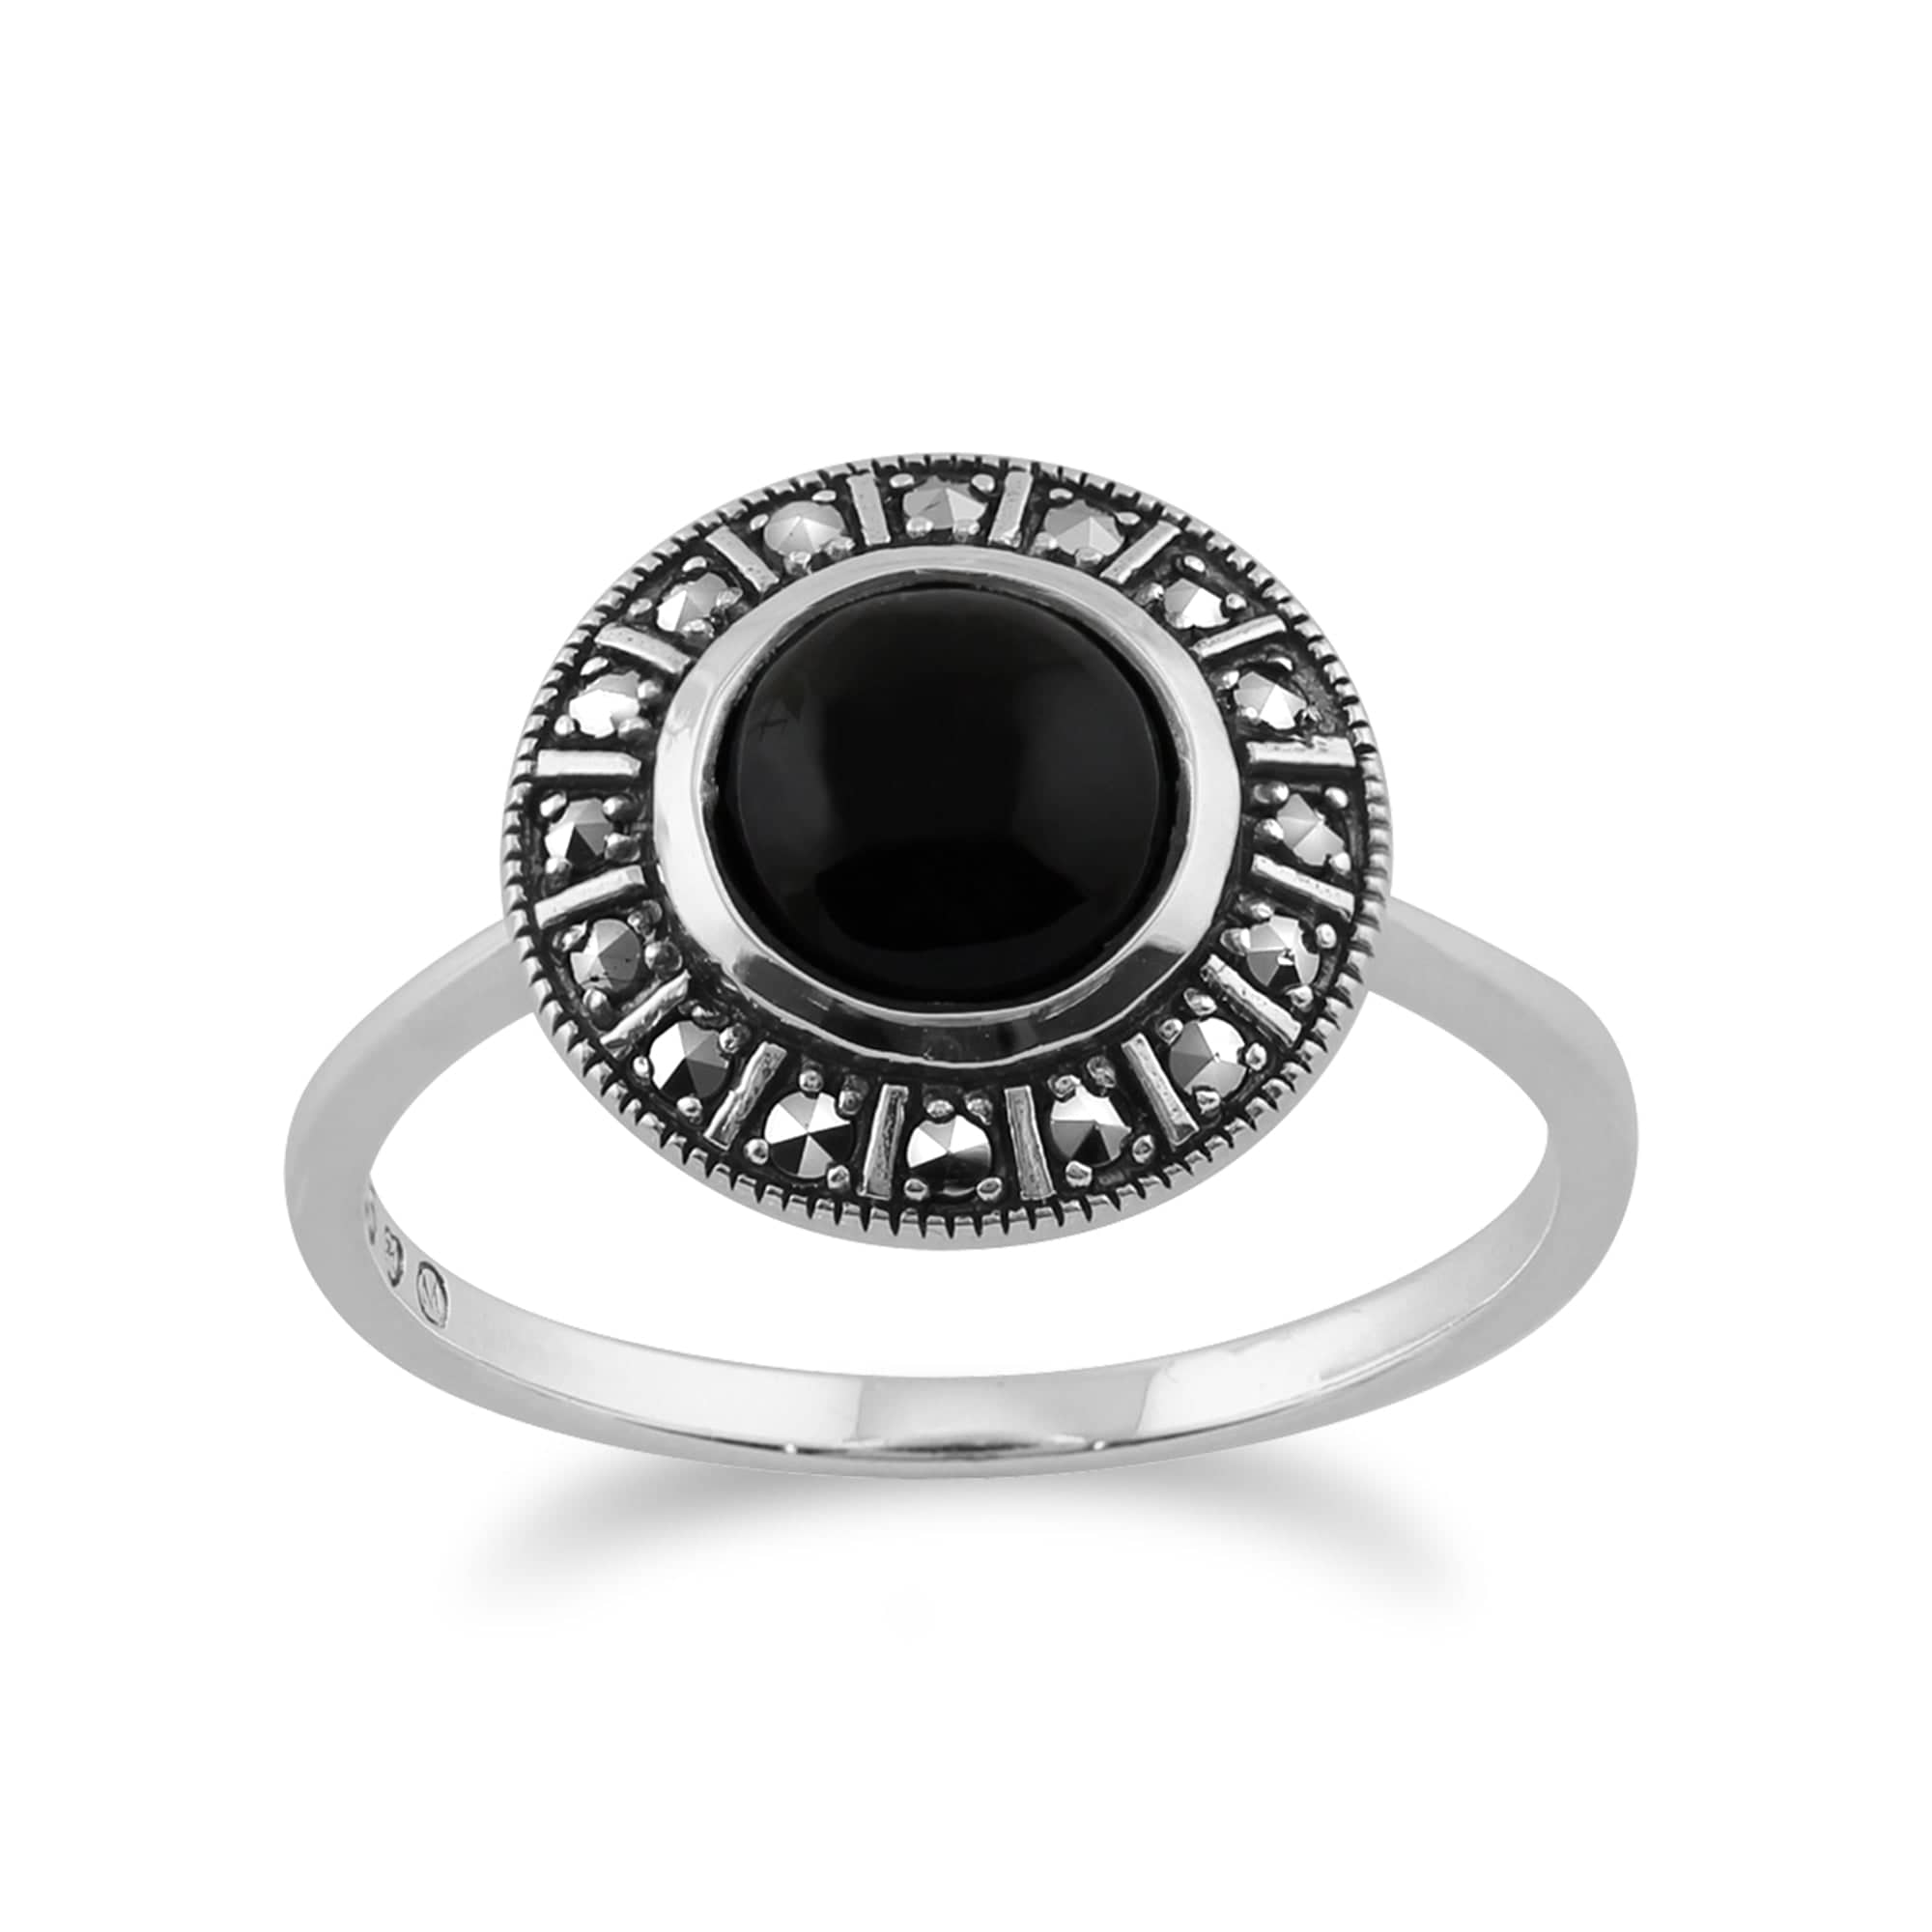 Art Deco Style Round Black Onyx Cabochon & Marcasite Halo Ring in 925 Sterling Silver